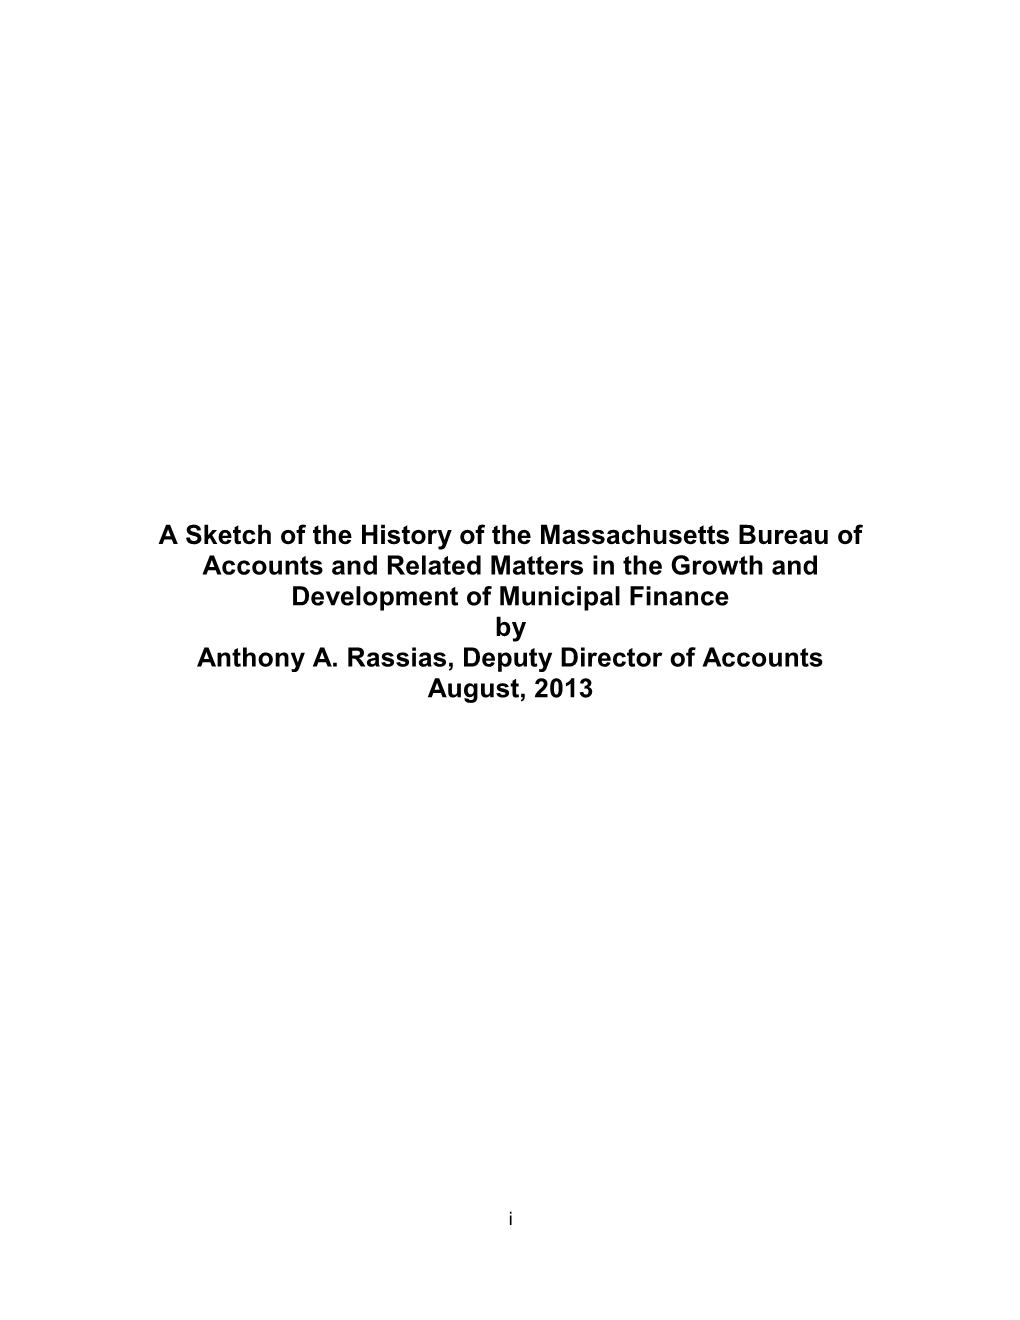 A Sketch of the History of the Massachusetts Bureau of Accounts and Related Matters in the Growth and Development of Municipal Finance by Anthony A